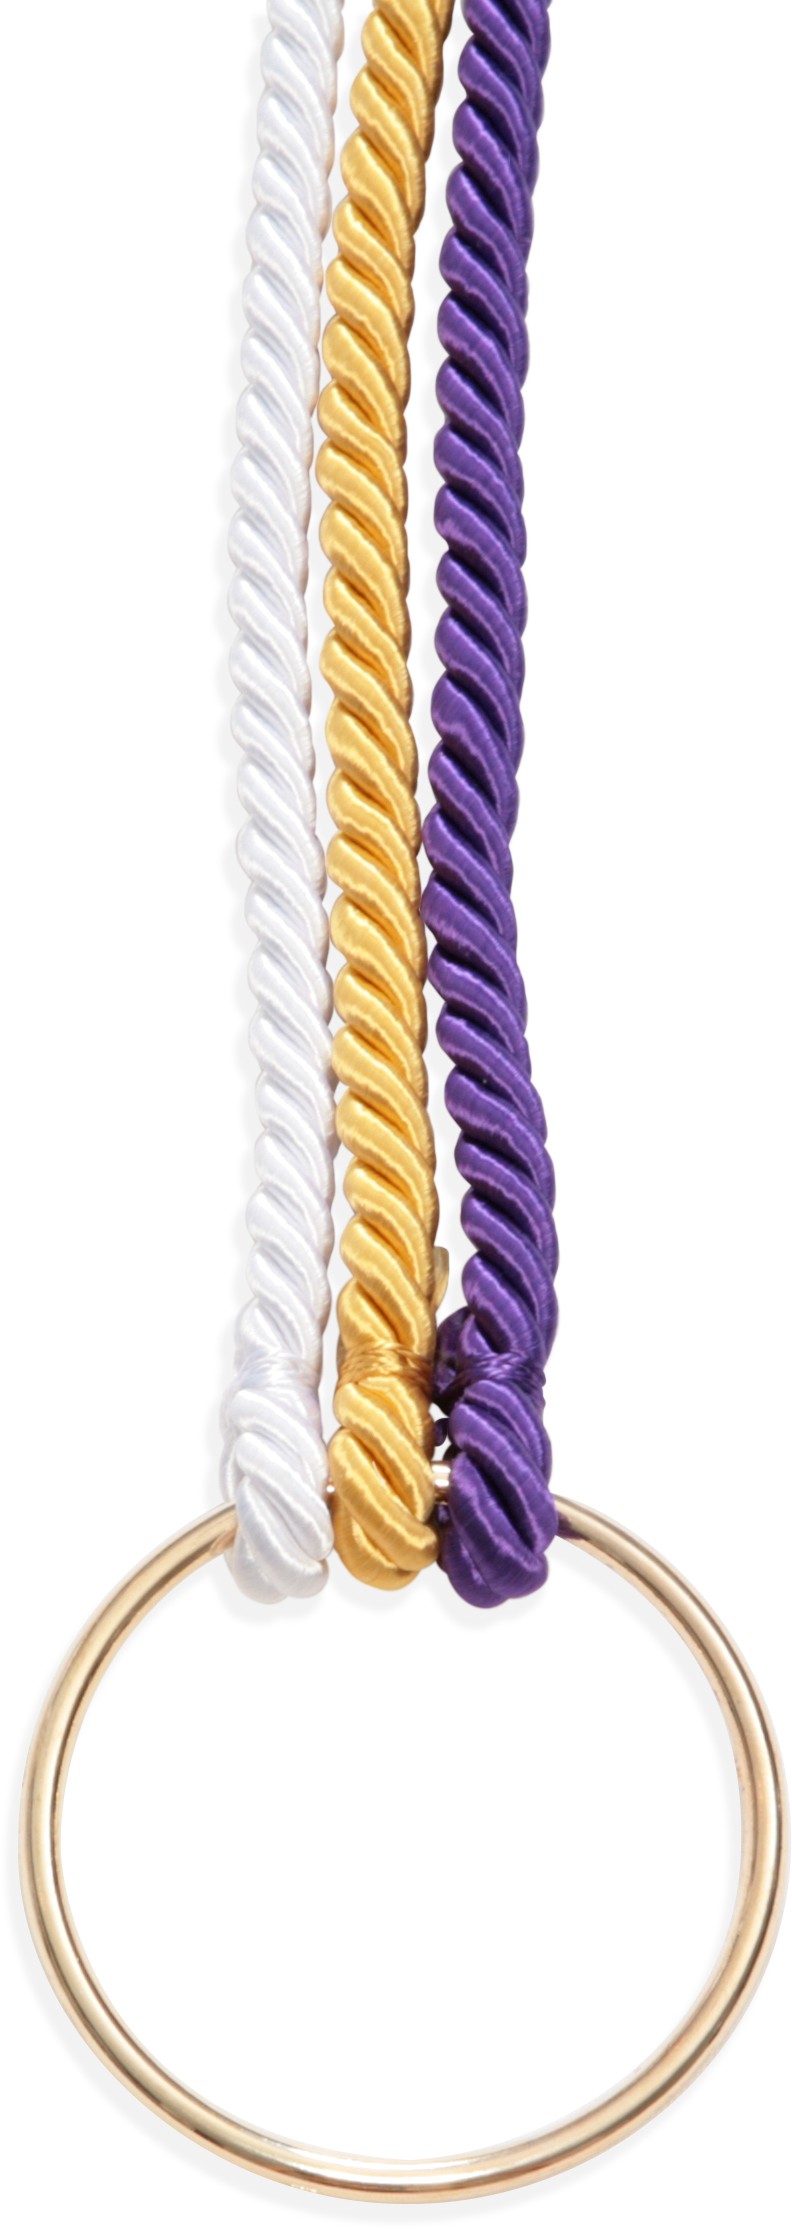 Chord Of Three Strands Ceremony Unity Wedding Knot (Gold,  White, Purple) with Gold Ring Classics Style